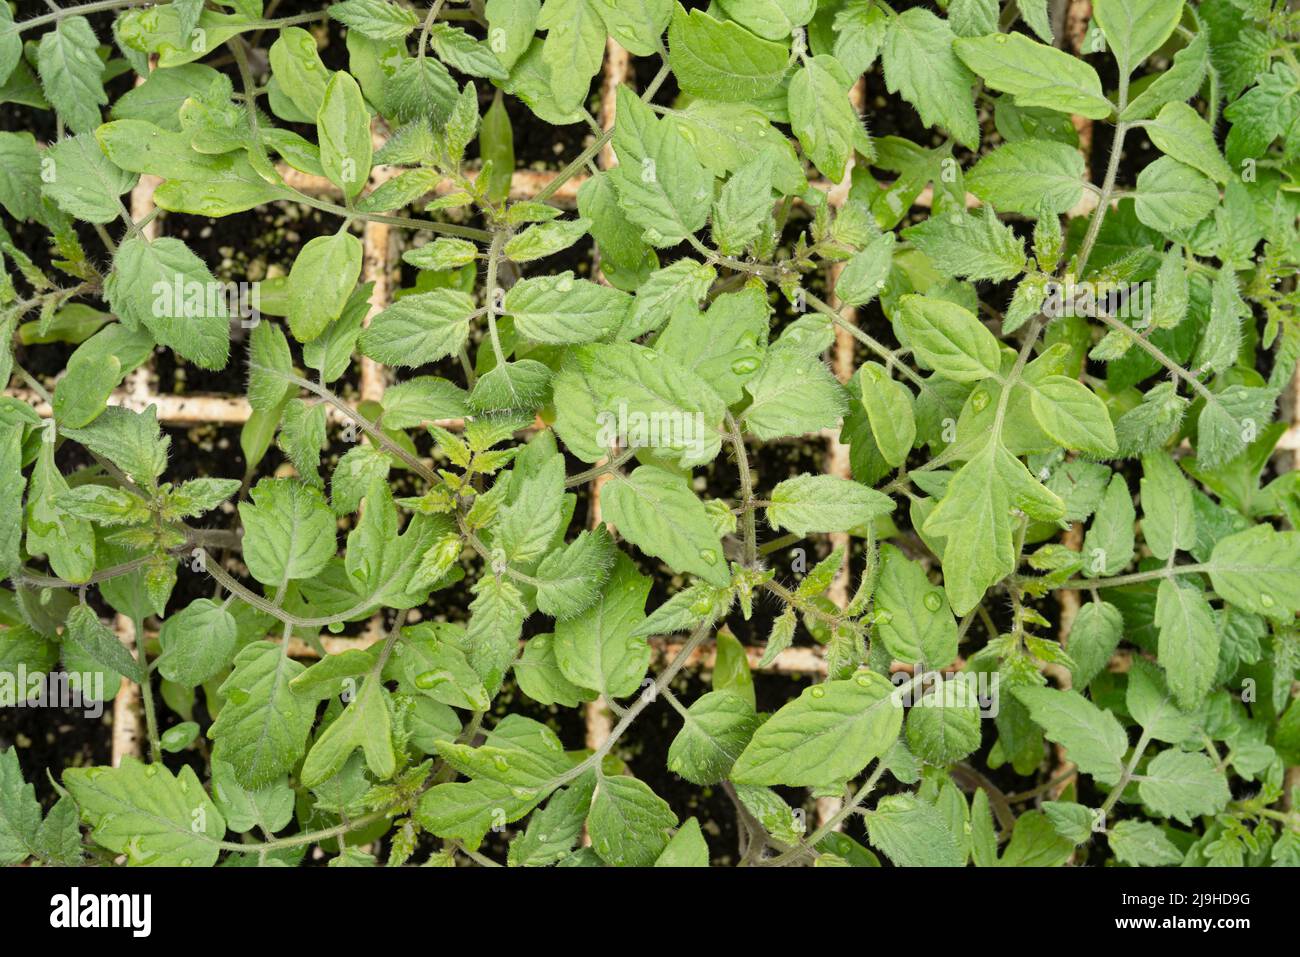 Young tomato transplants growing in a styrofoam tray. Stock Photo